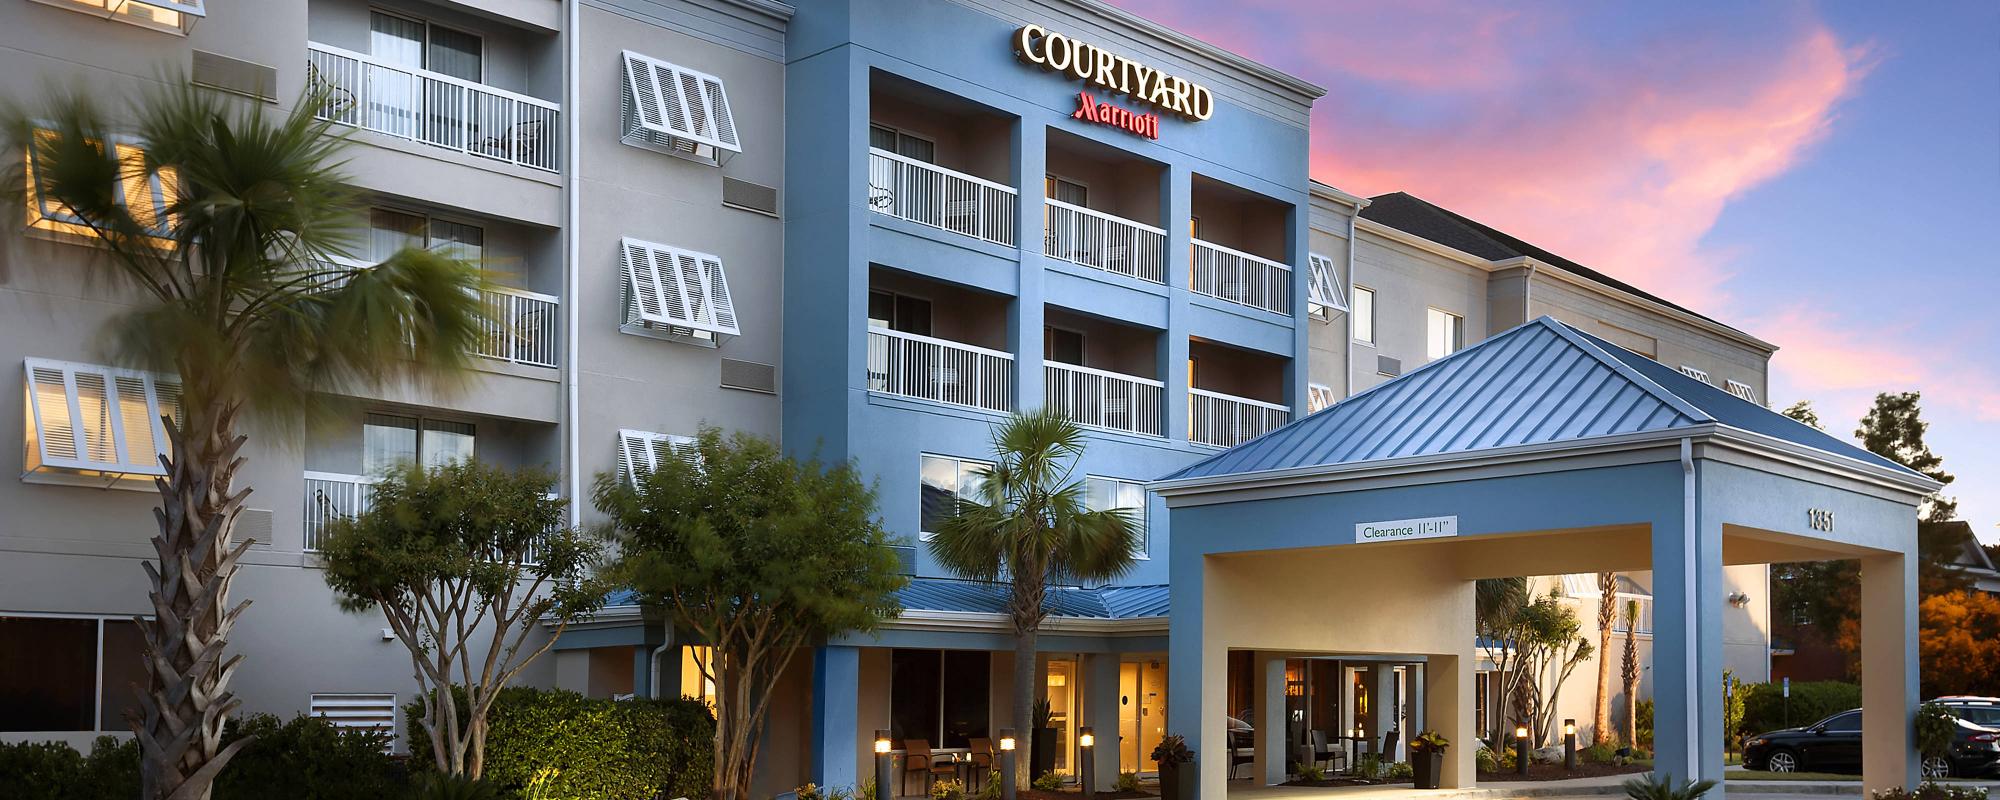 The Courtyard Myrtle Beach Broadway's picturesque entrance in sensational South Carolina.